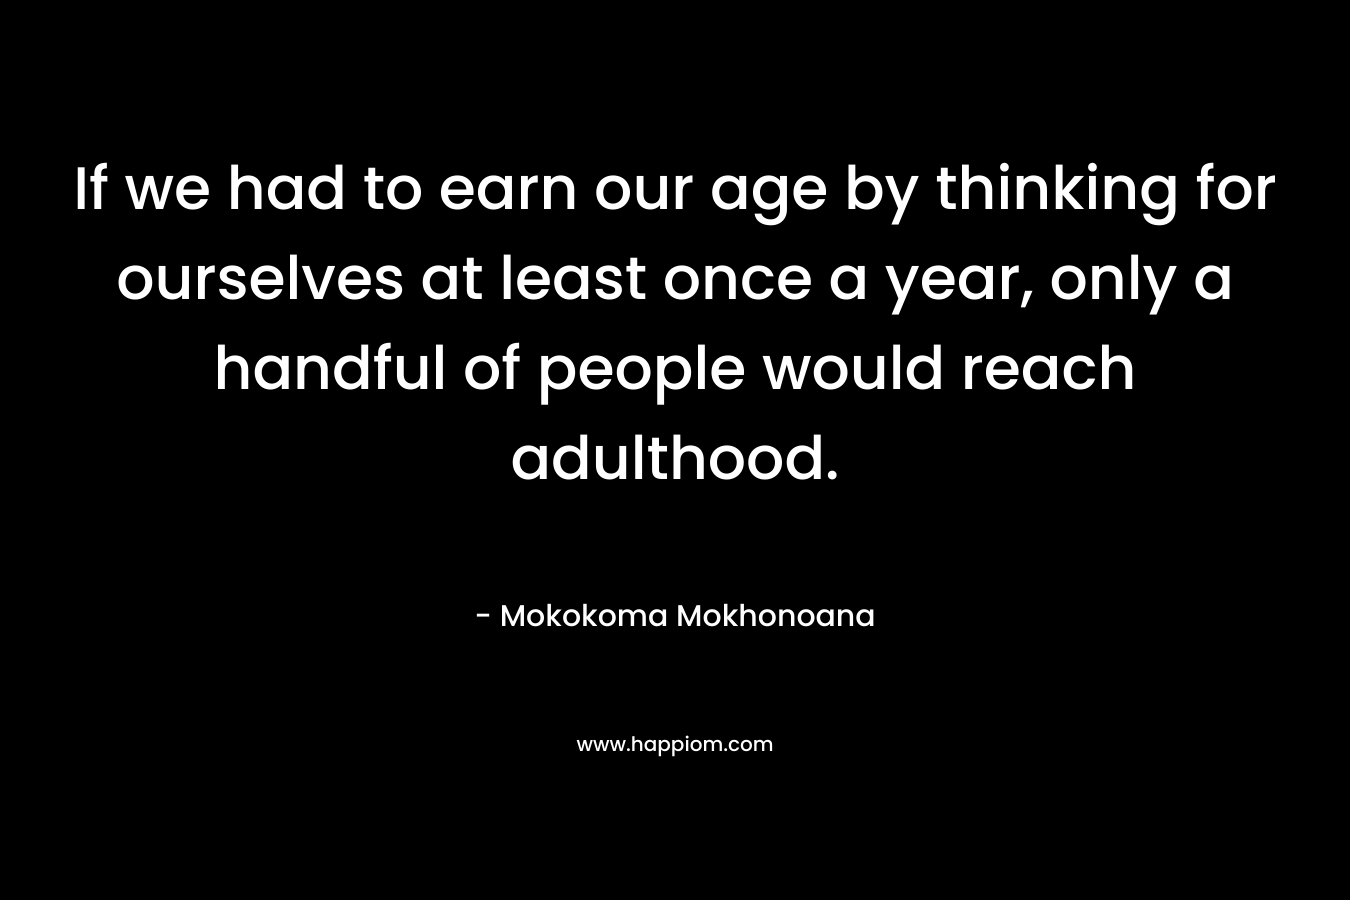 If we had to earn our age by thinking for ourselves at least once a year, only a handful of people would reach adulthood.